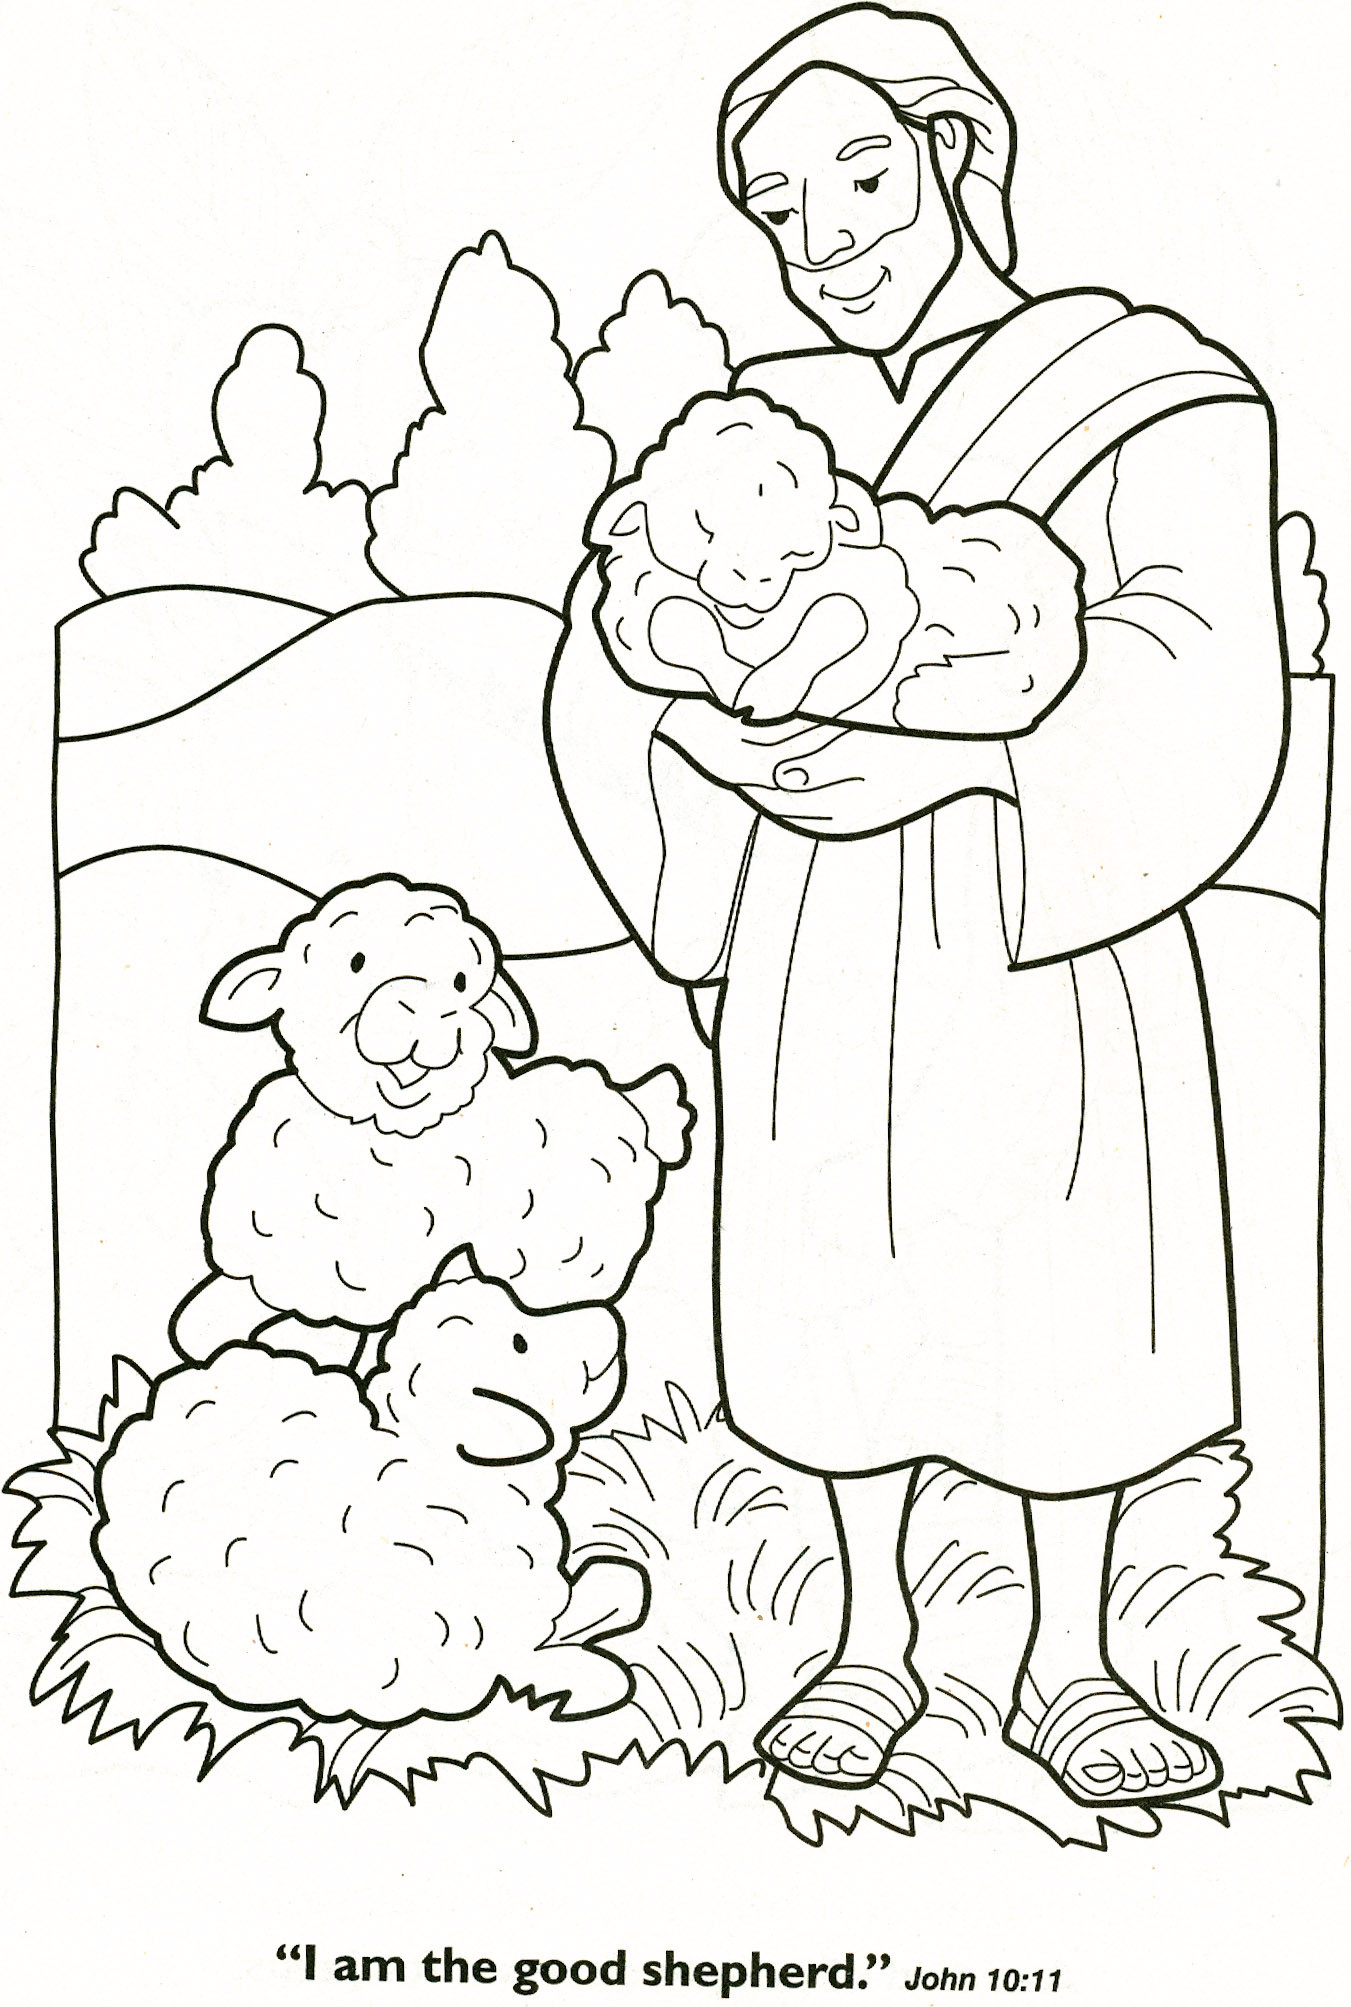 Scripture Coloring Pages For Kids
 The Good Shepherd